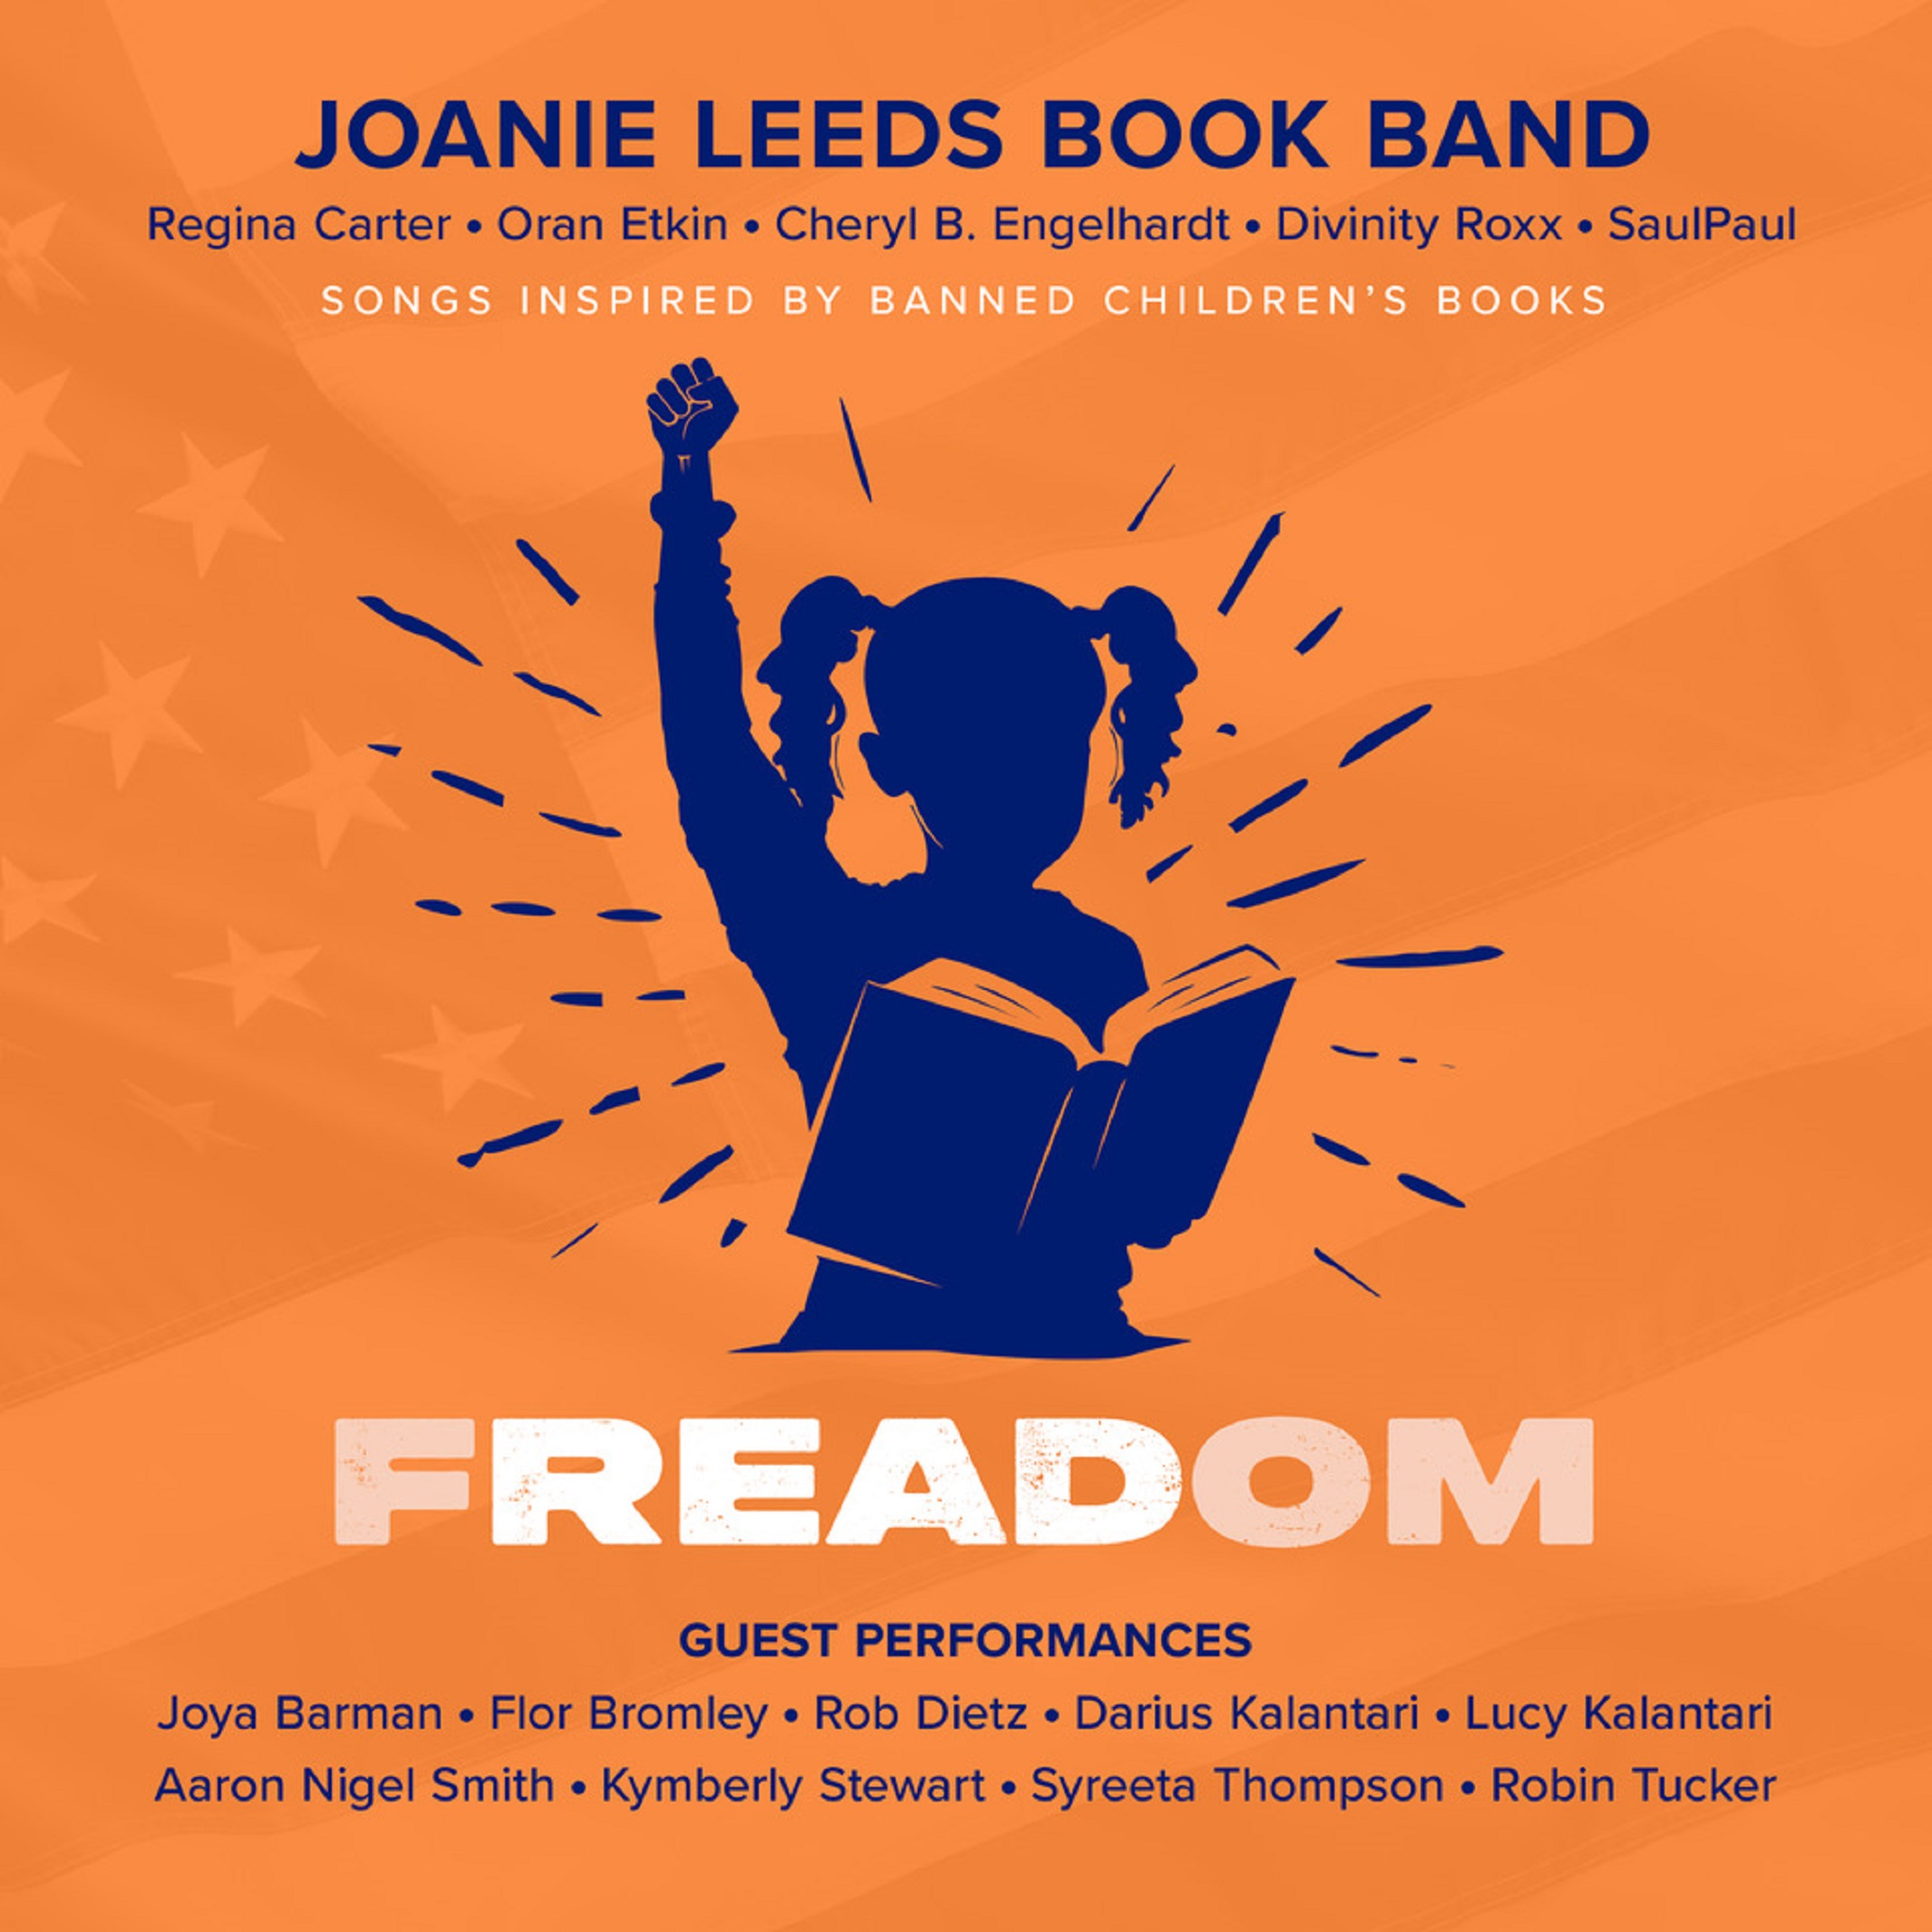 GRAMMY-Winner Joanie Leeds Protests Against Banned Books Movement with New Album, "FREADOM" + New Single & Music Video for "Banned"